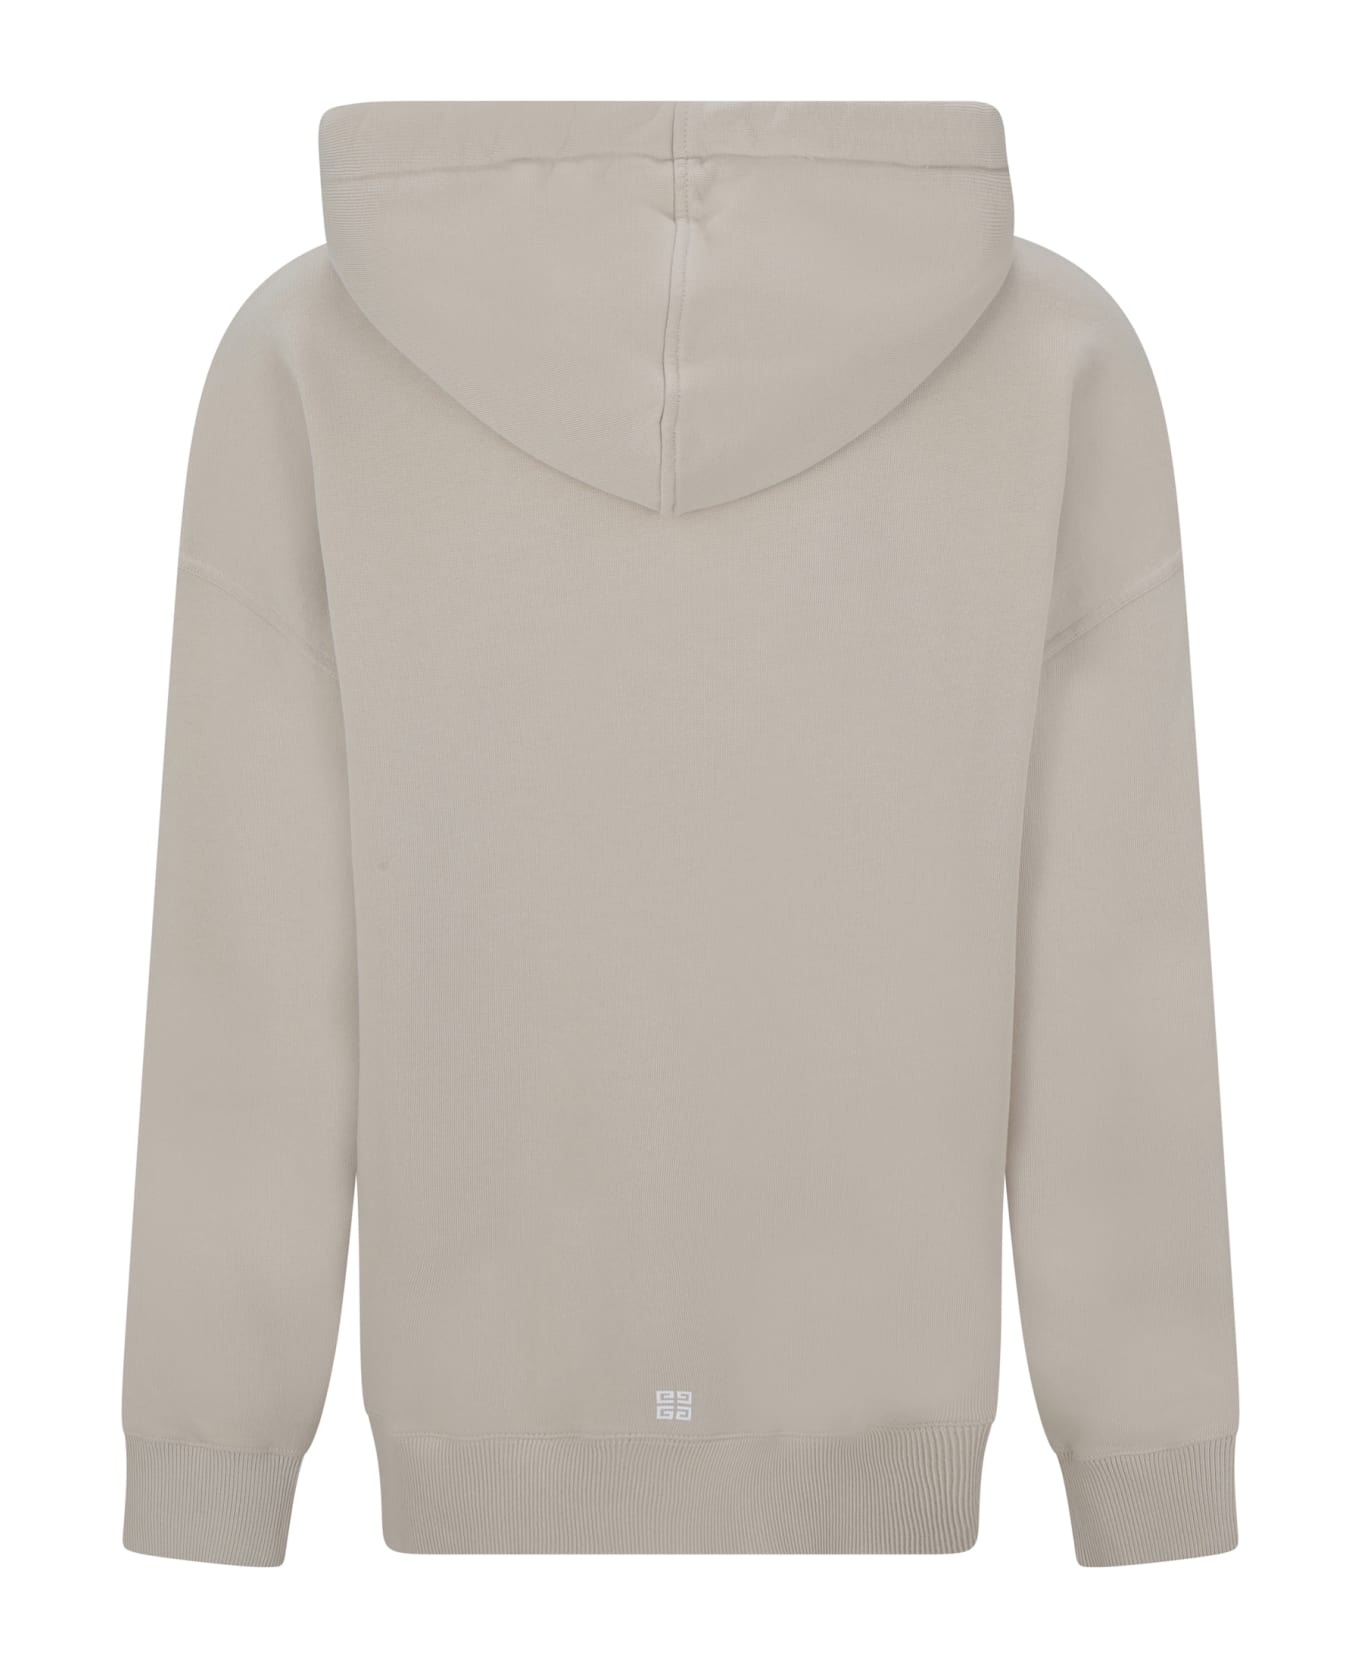 Givenchy Archetype Hoodie - Nude & Neutrals